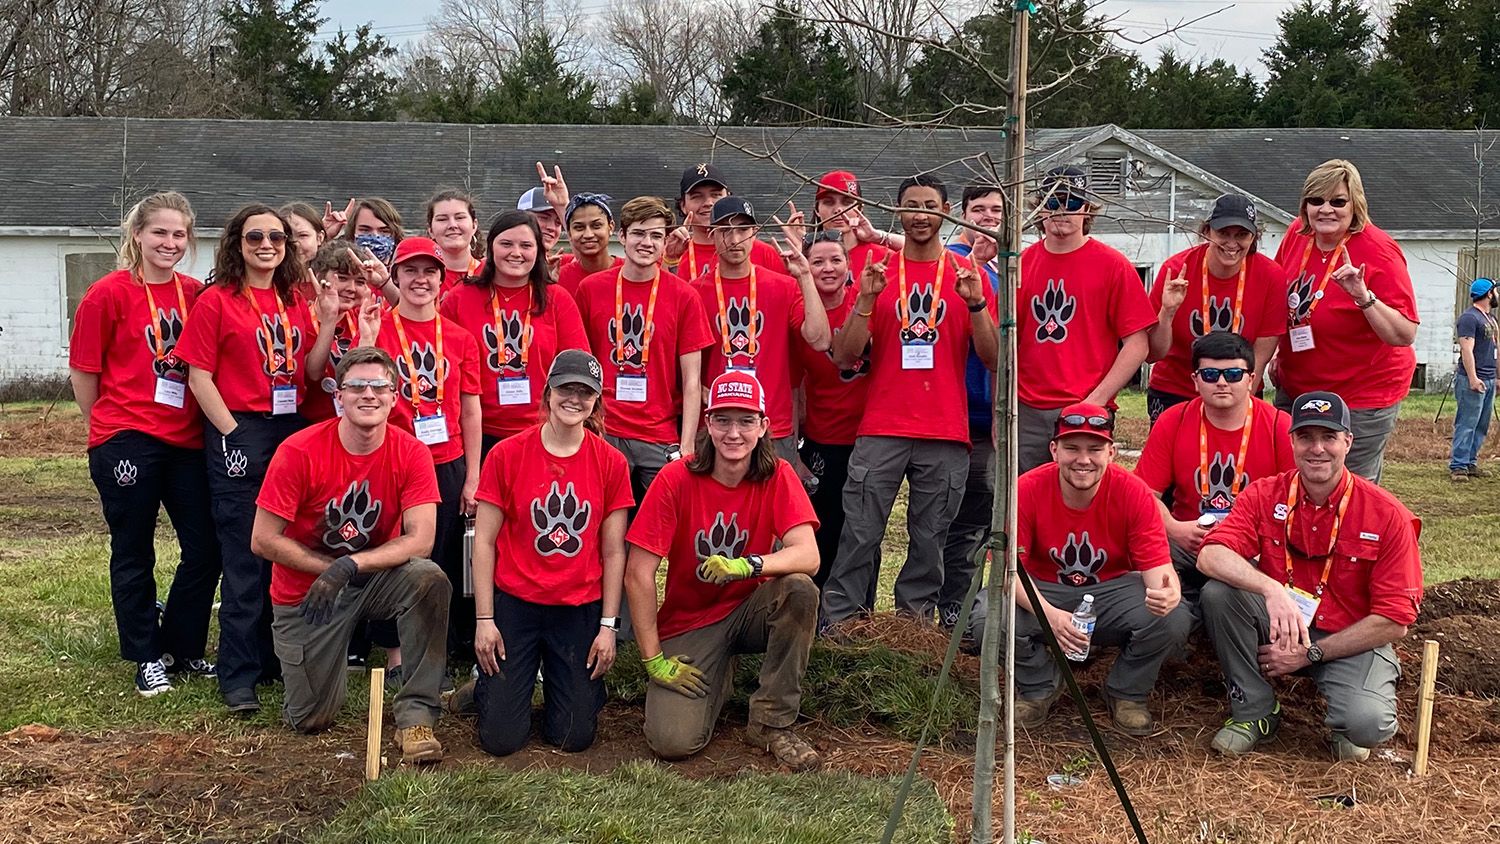 2022 HortPack team photo at National Collegiate Landscape Competition hosted at NC&#160;State.